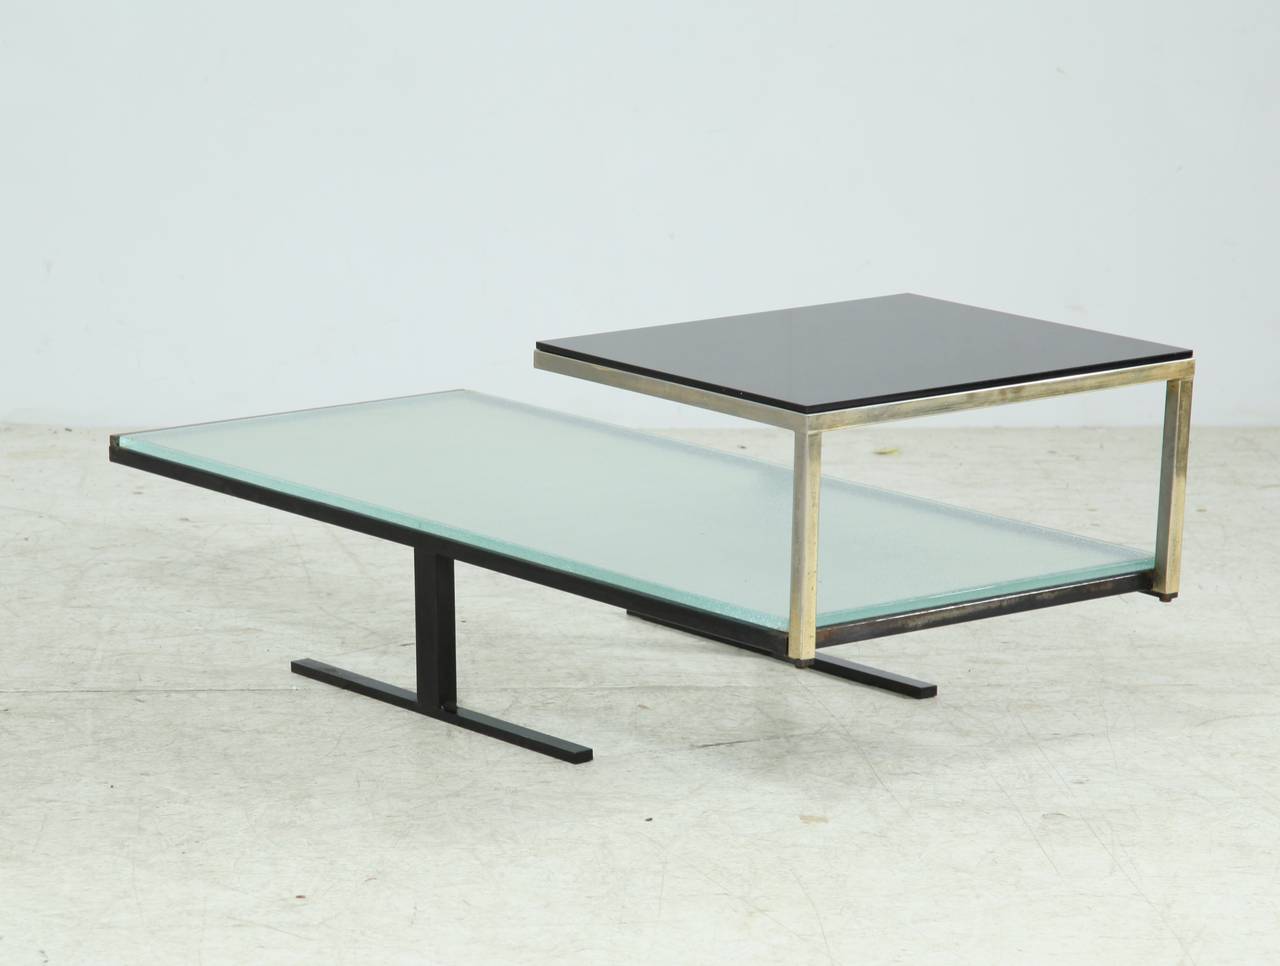 A rare and architectural coffee table in the manner of René-Jean Caillette. The table is made of a two-tiered metal frame with two removable glass tops. The first top is of clear pressed glass and the second of a dark pressed glass. A beautiful